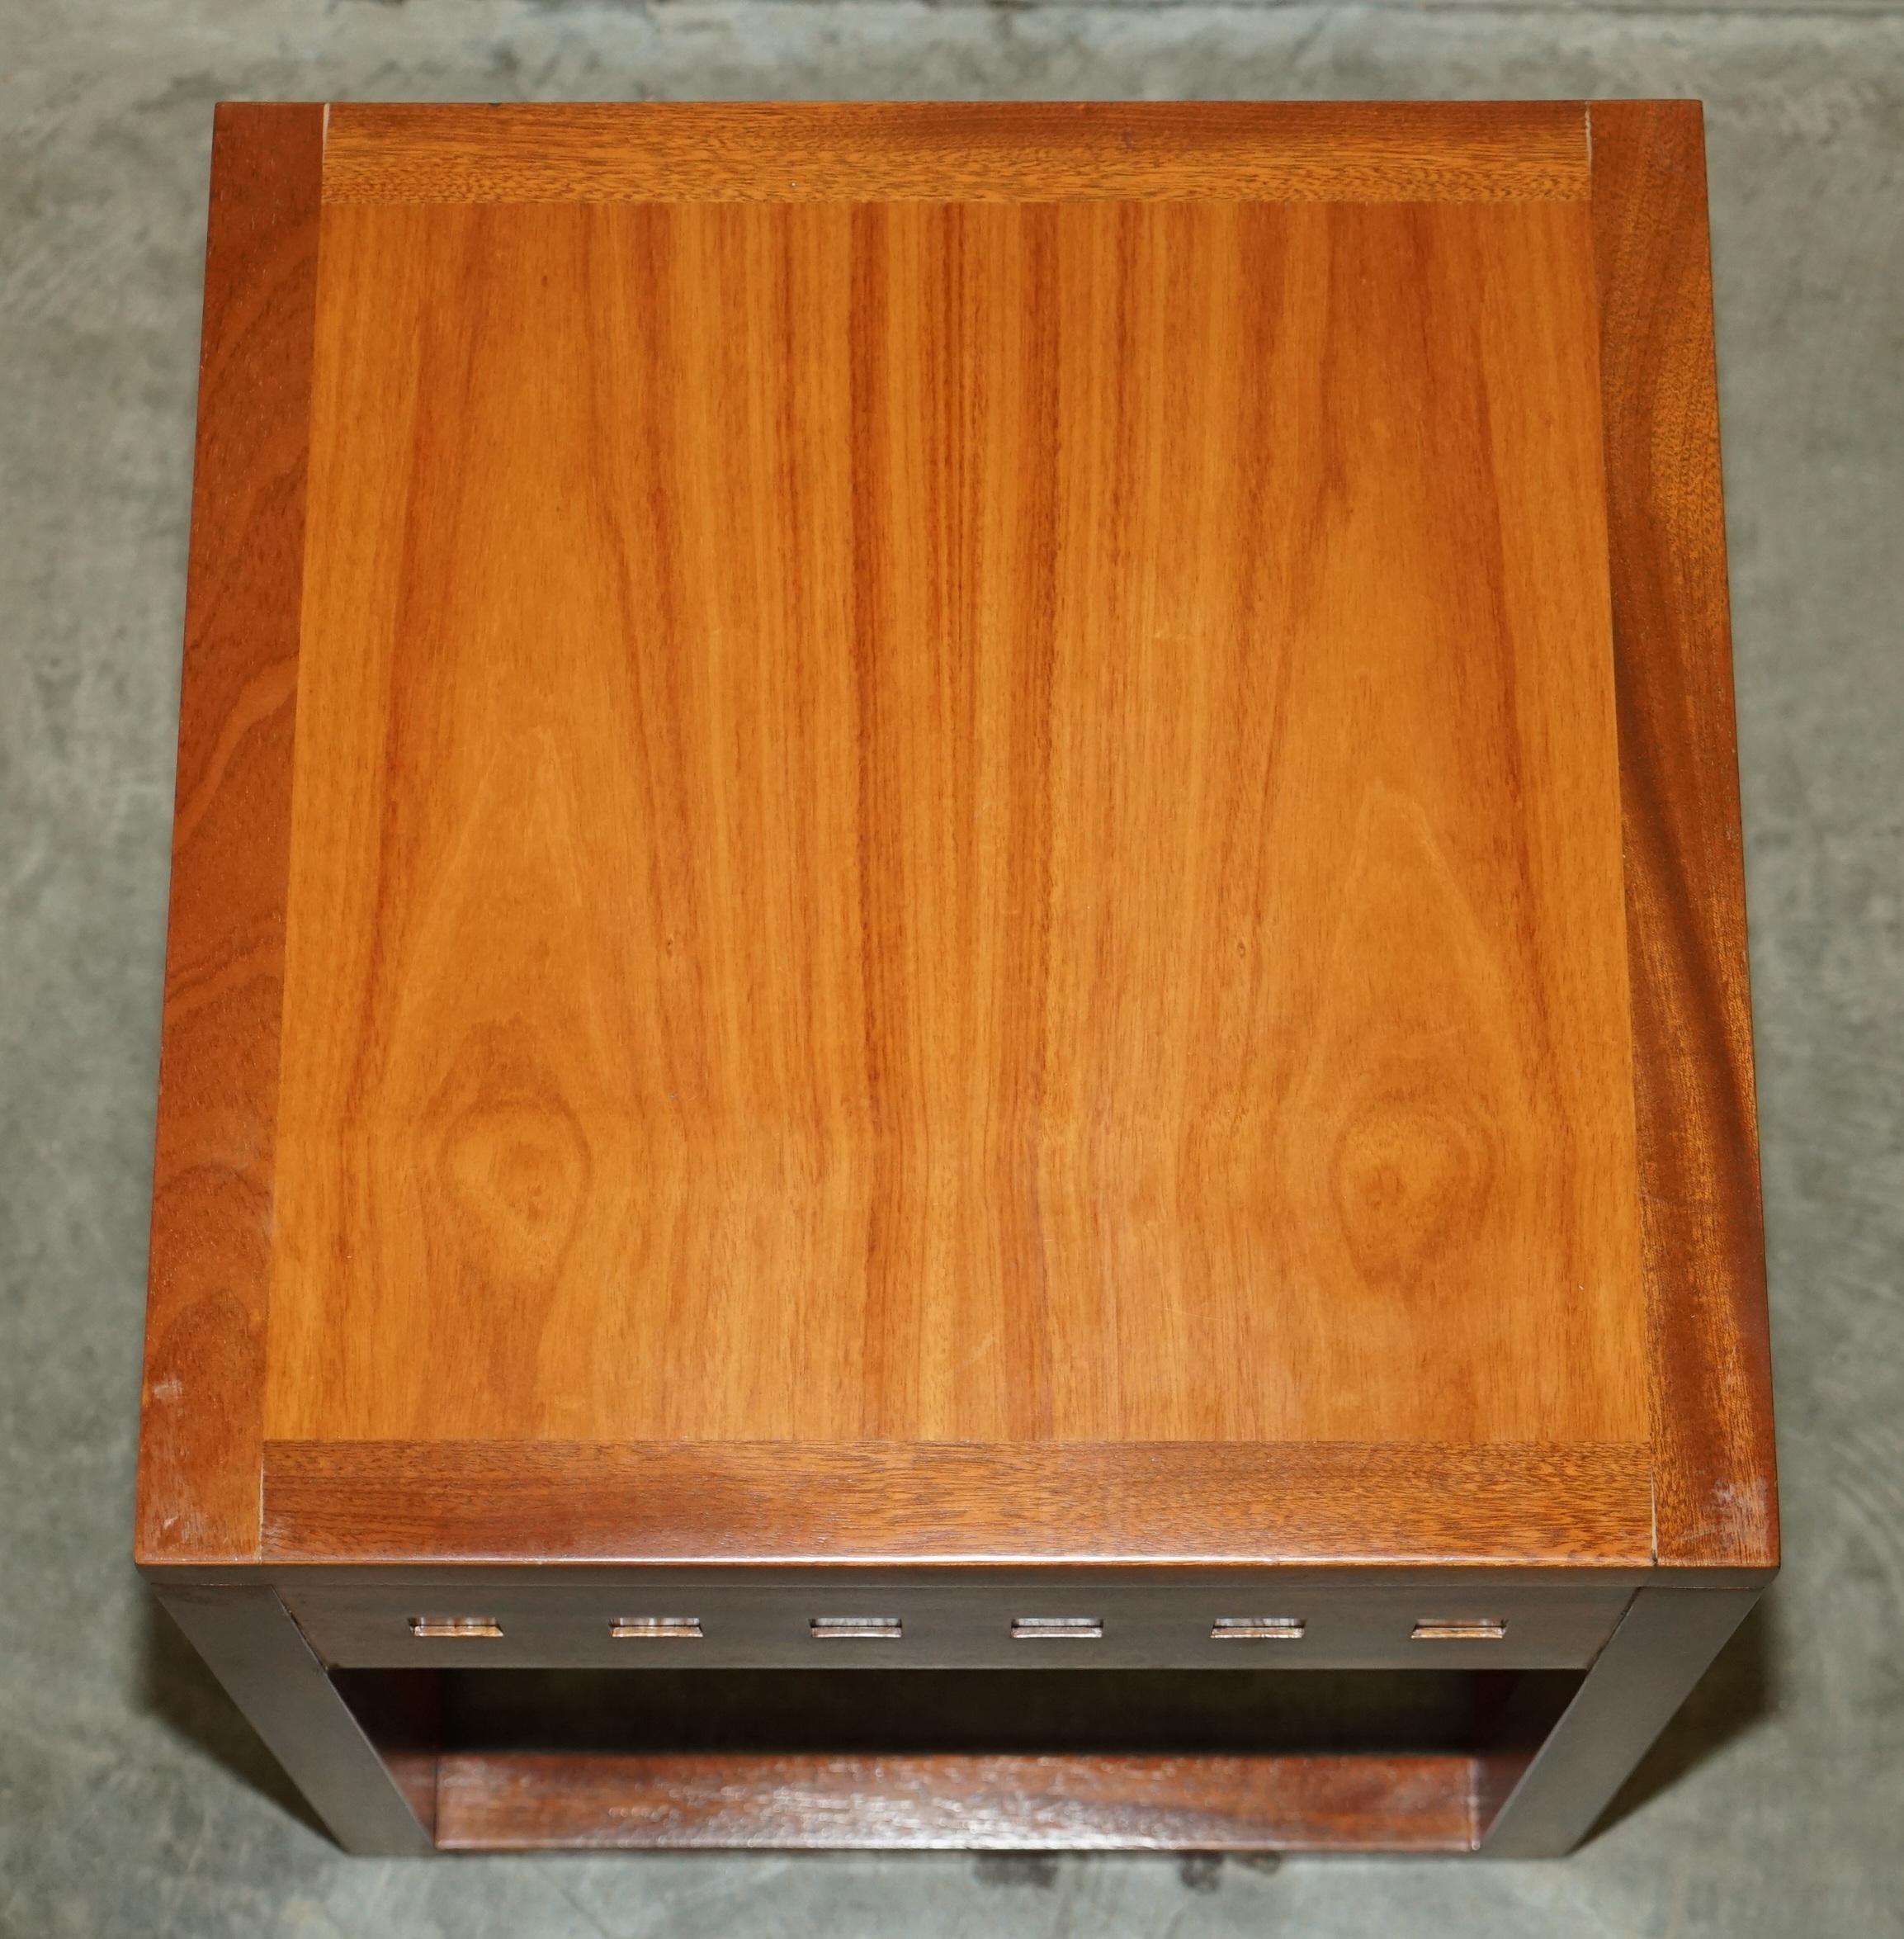 English Pair of Modern Hand Made Cherry and Teak Wood Side Tables x 4 Available in Total For Sale